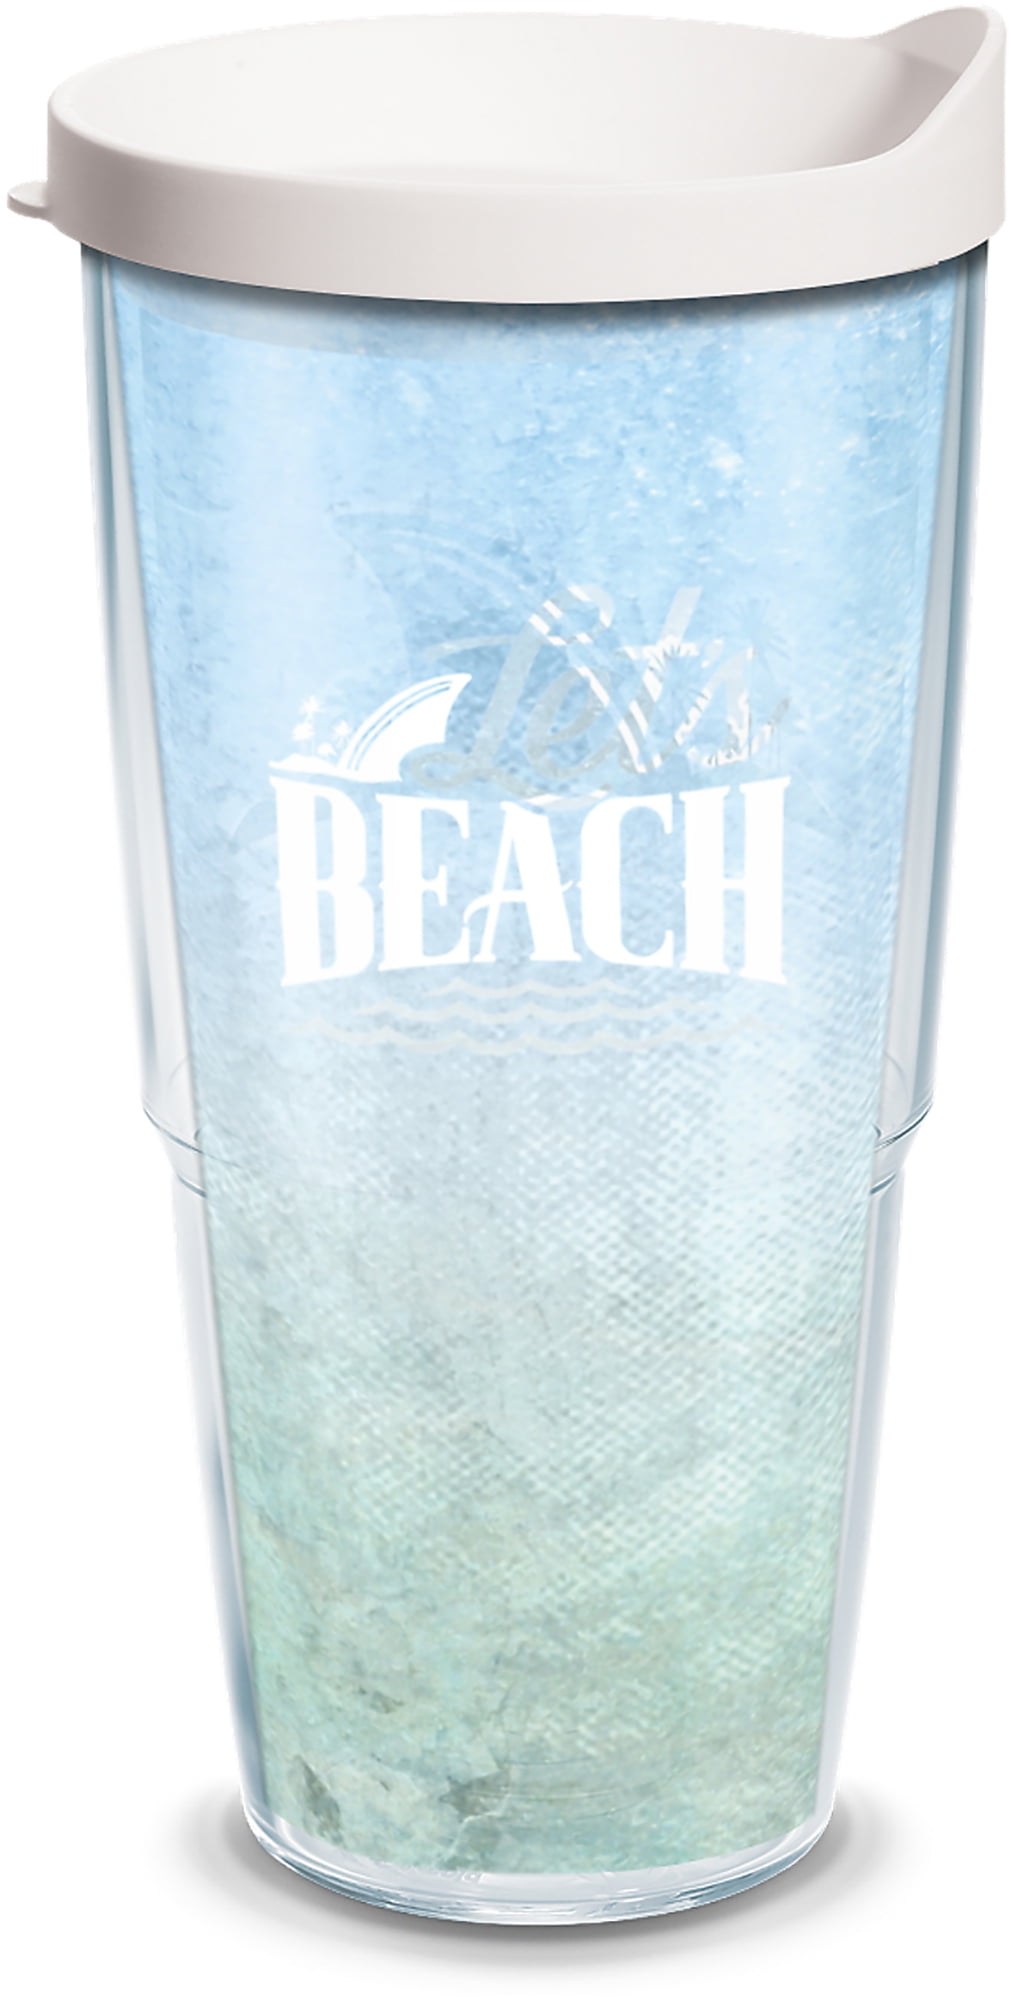 Tervis Social Distancing Yeti Made in USA Double Walled Insulated Tumbler  Travel Cup Keeps Drinks Cold & Hot, 24oz, Classic 